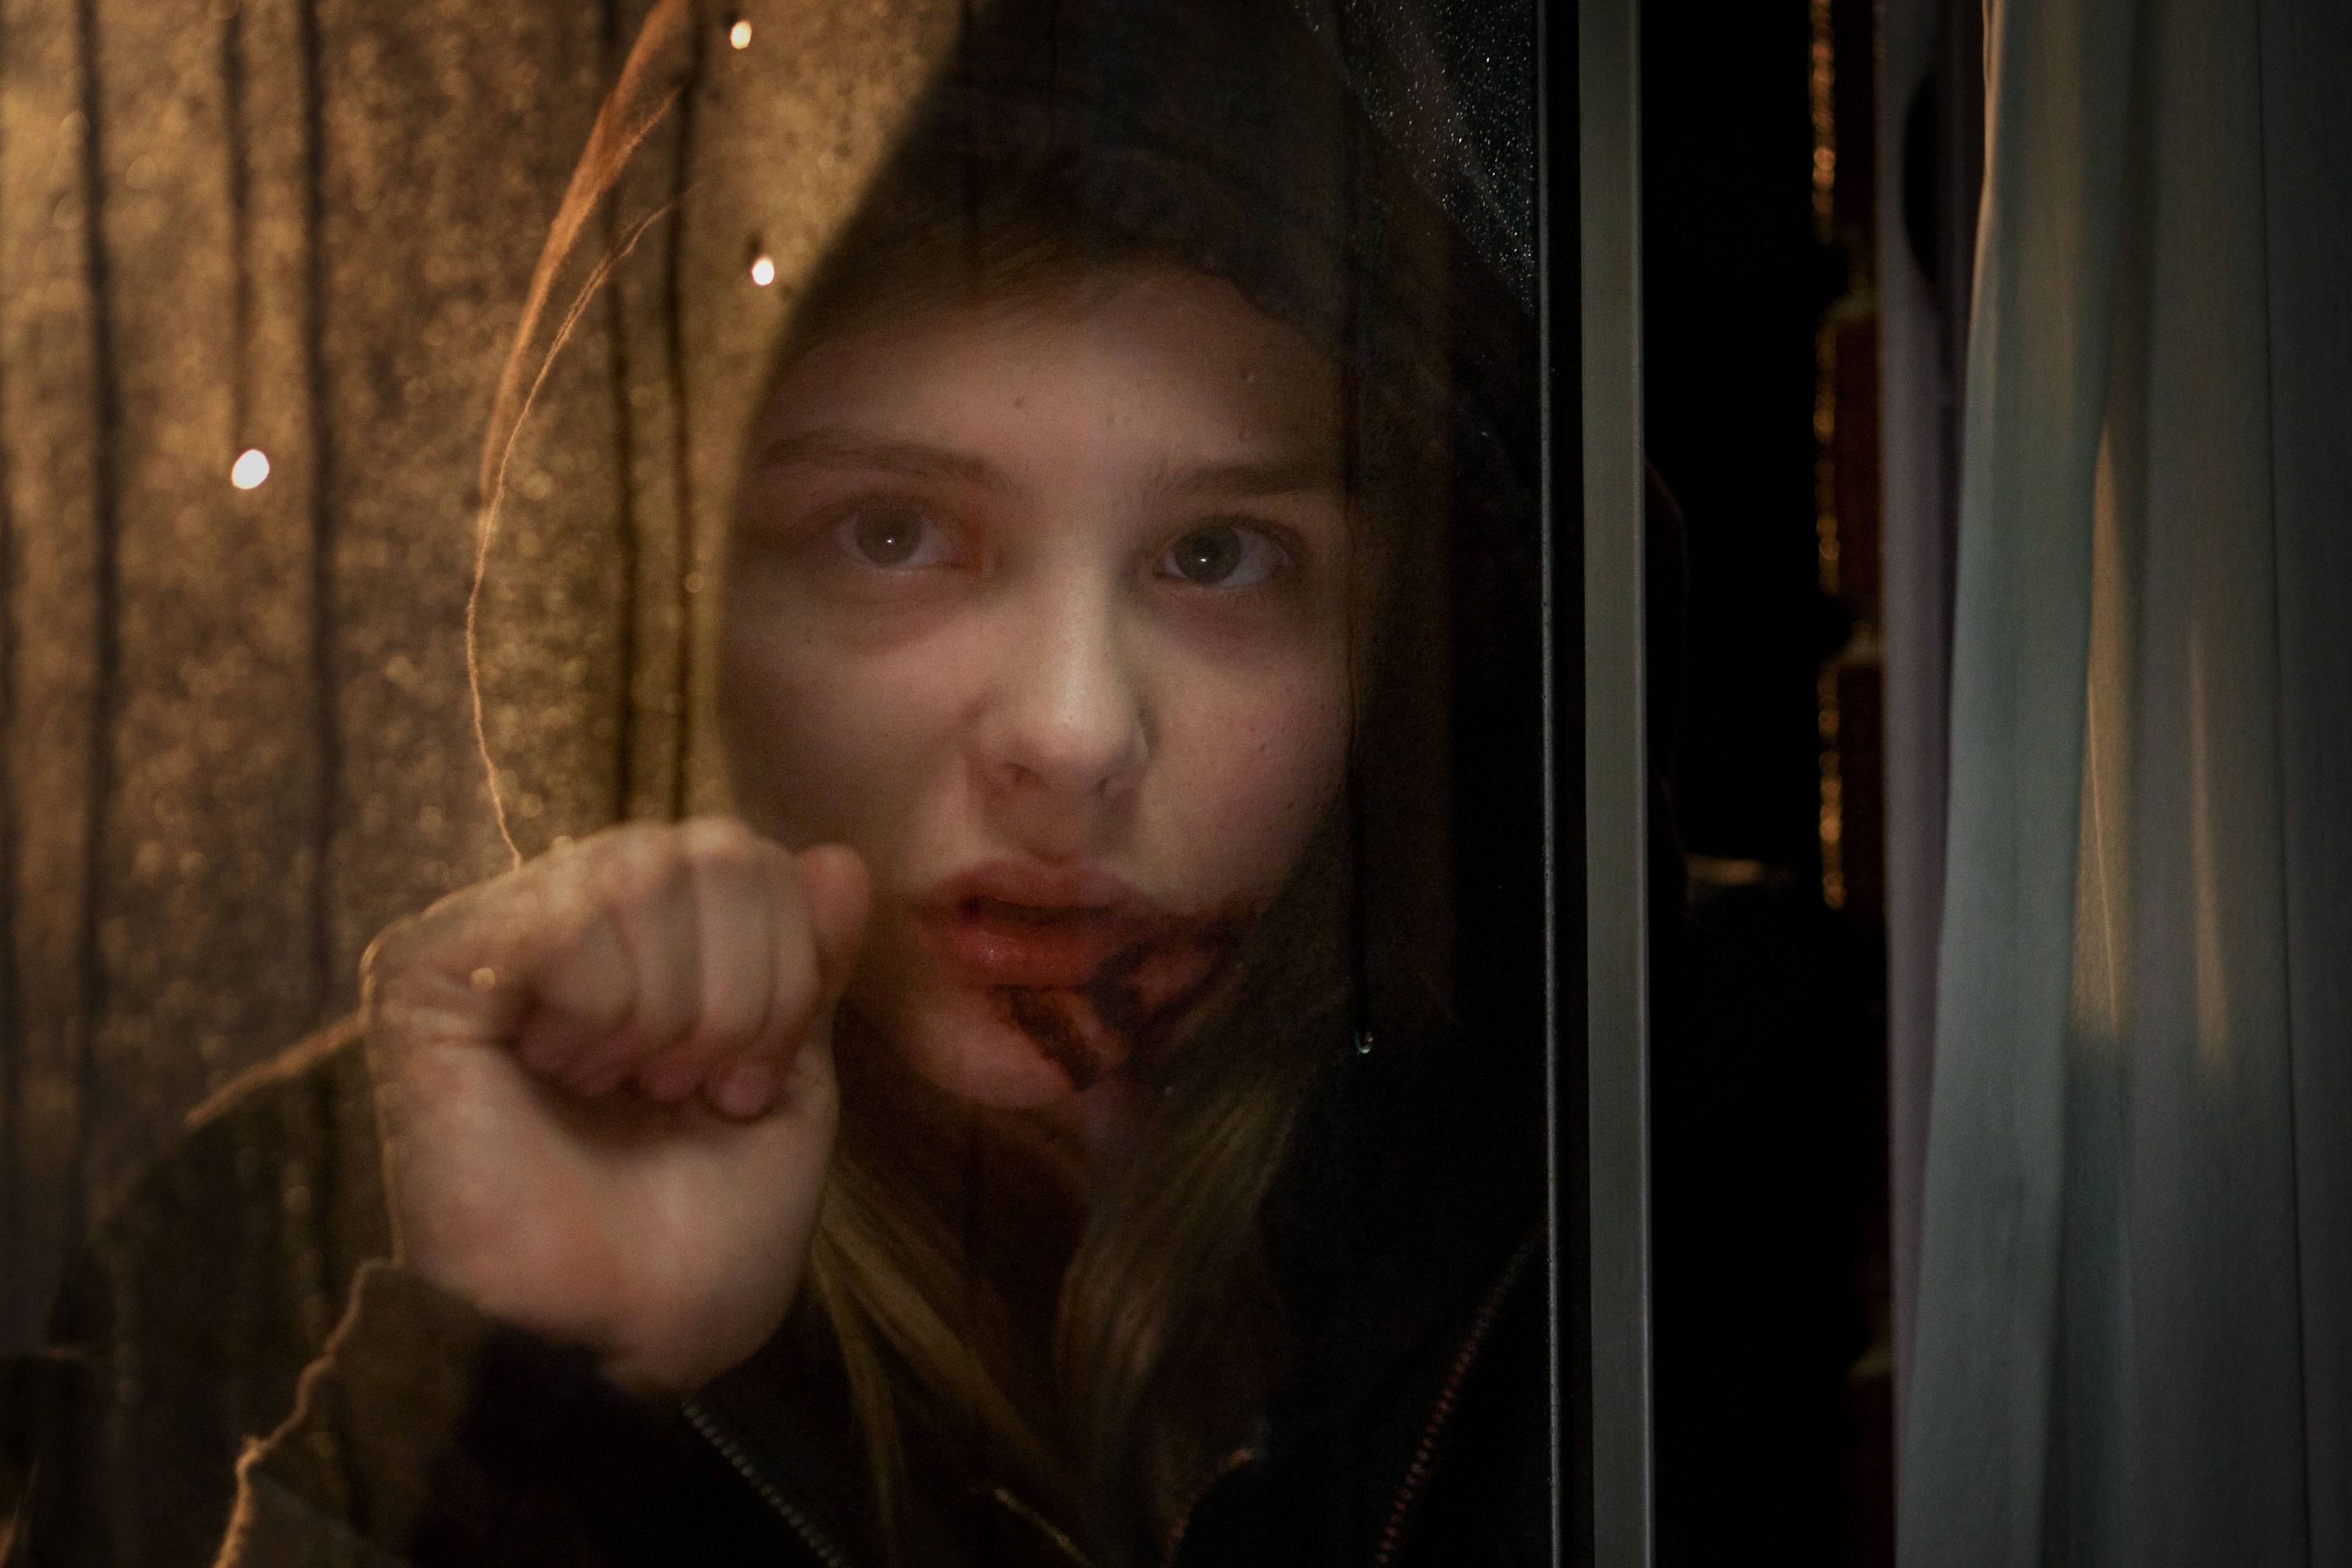 Abby wears a hood and knocks on a window in a scene from 'Let Me In.'